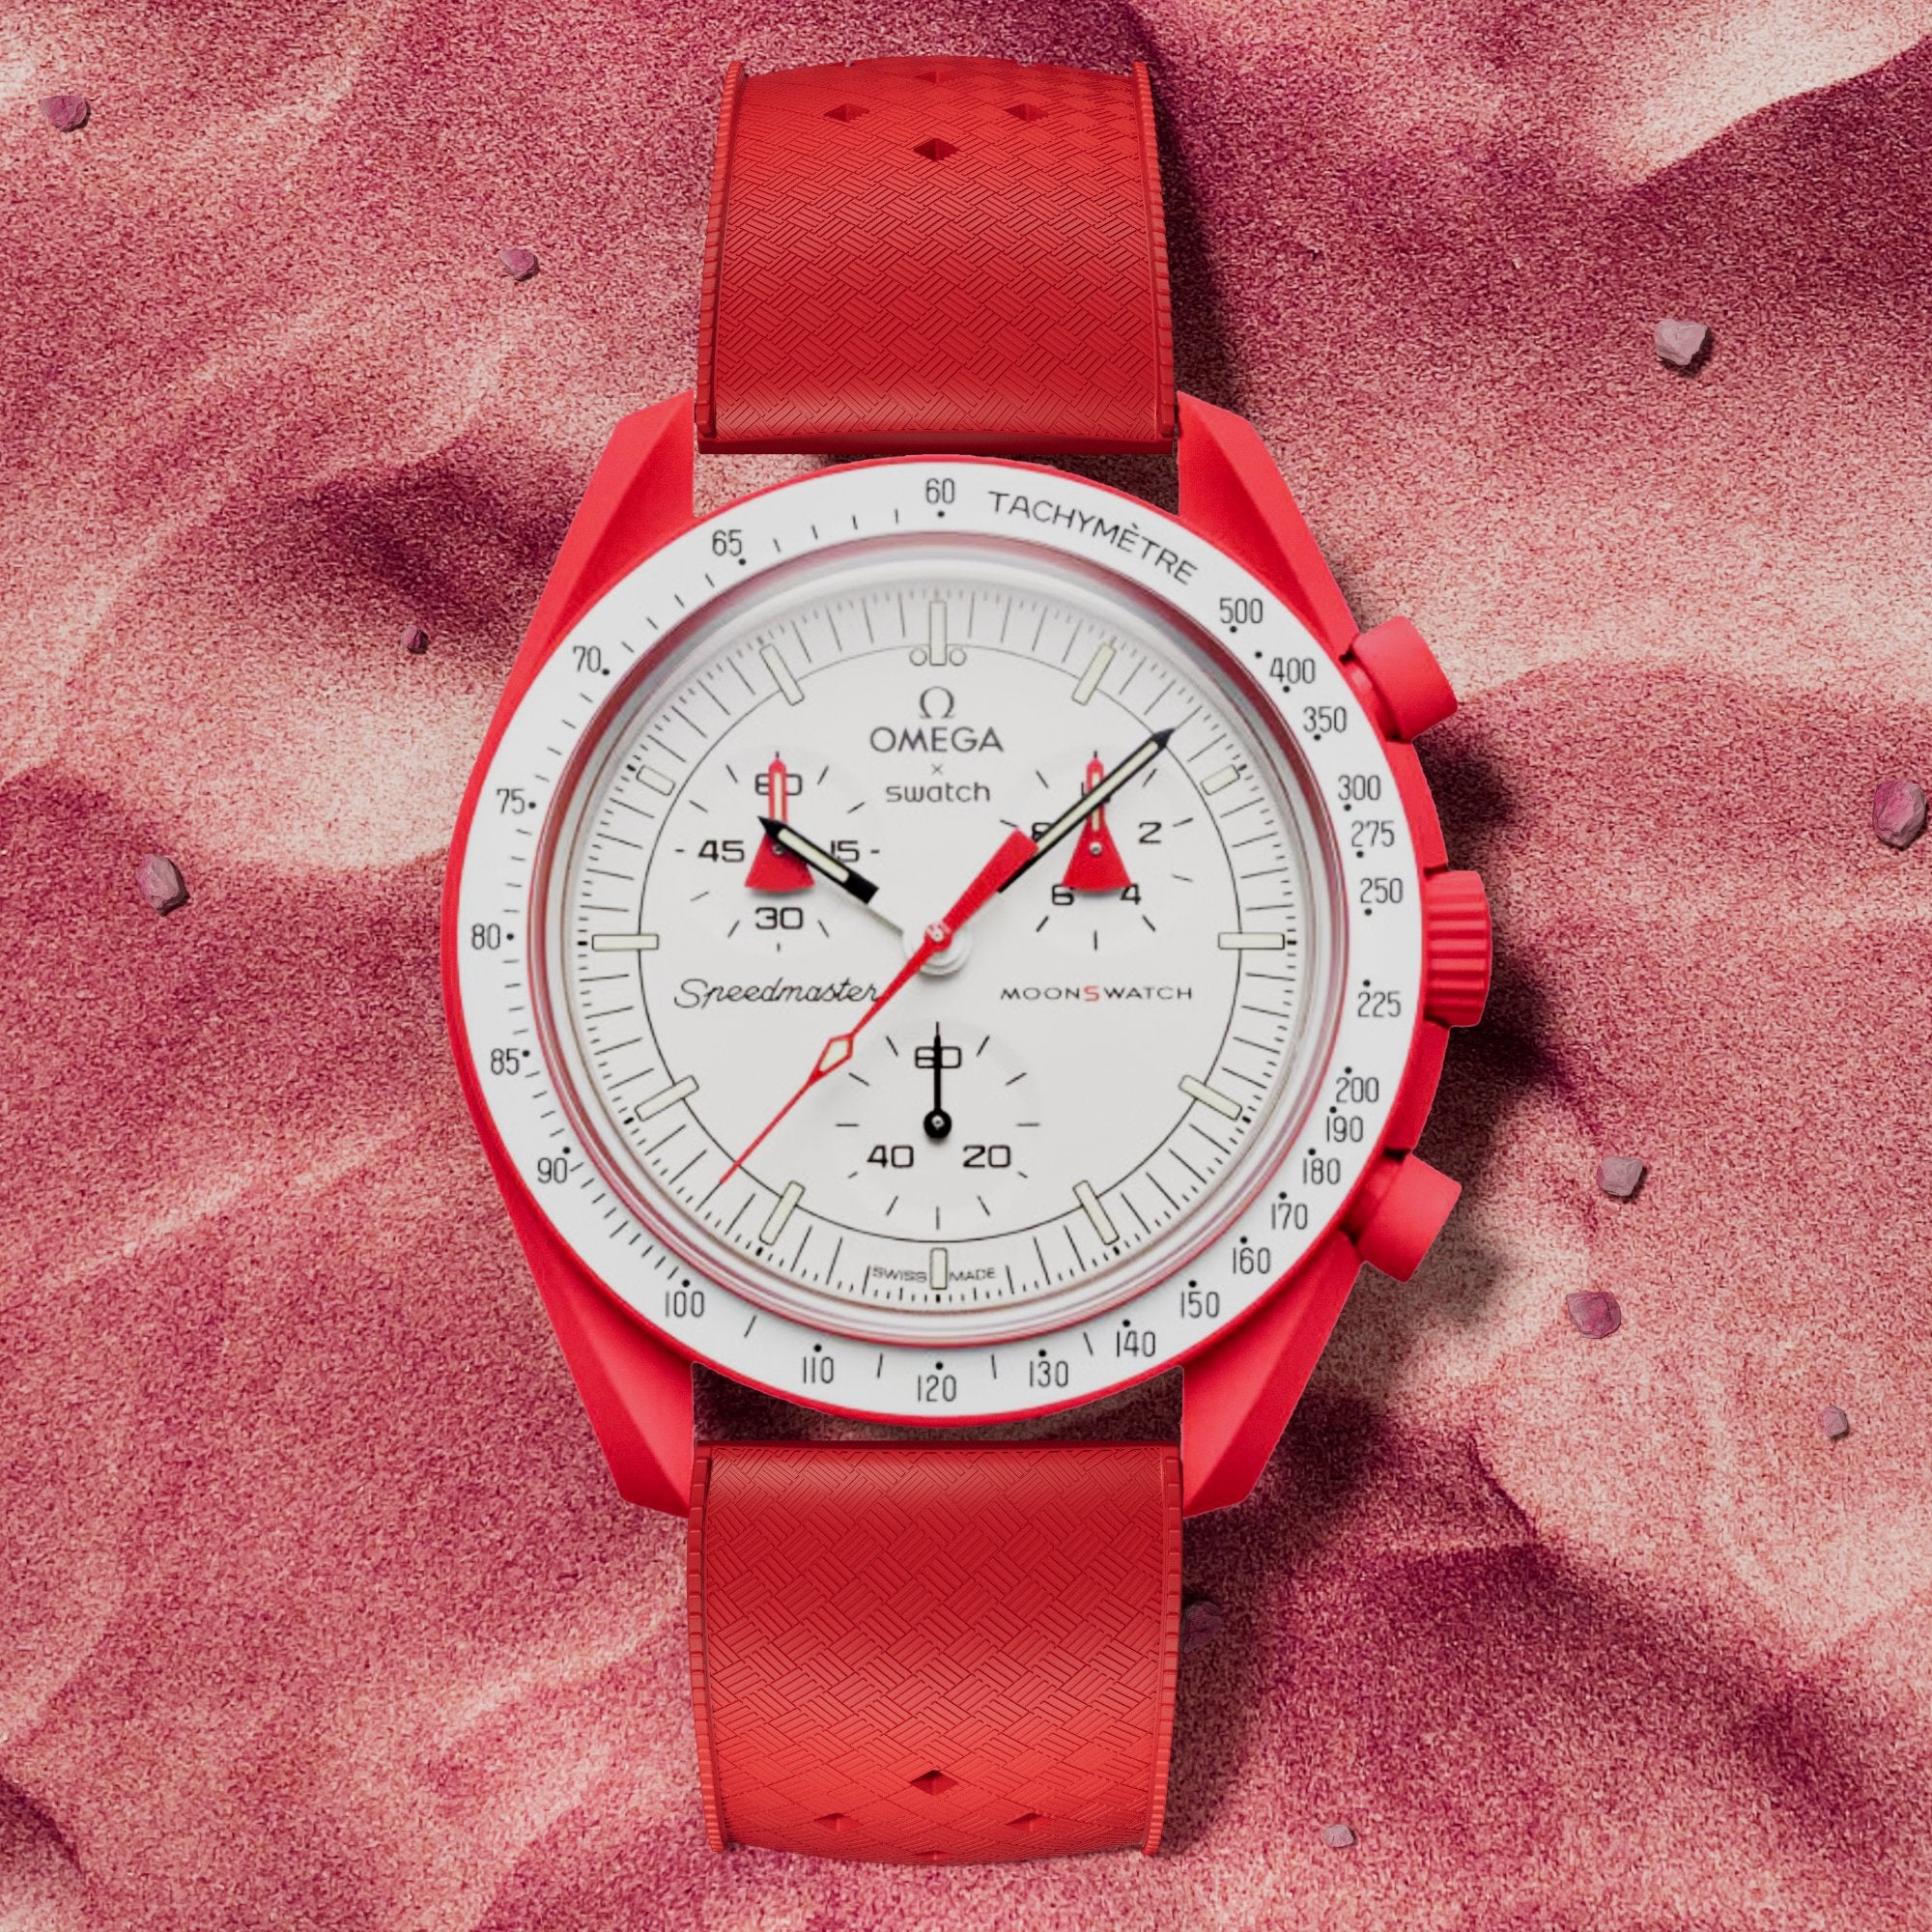 Calypso Tropical Style FKM Rubber Strap- Quick-Release-Compatible with Omega x Swatch - Red (2422 -Strapseeker